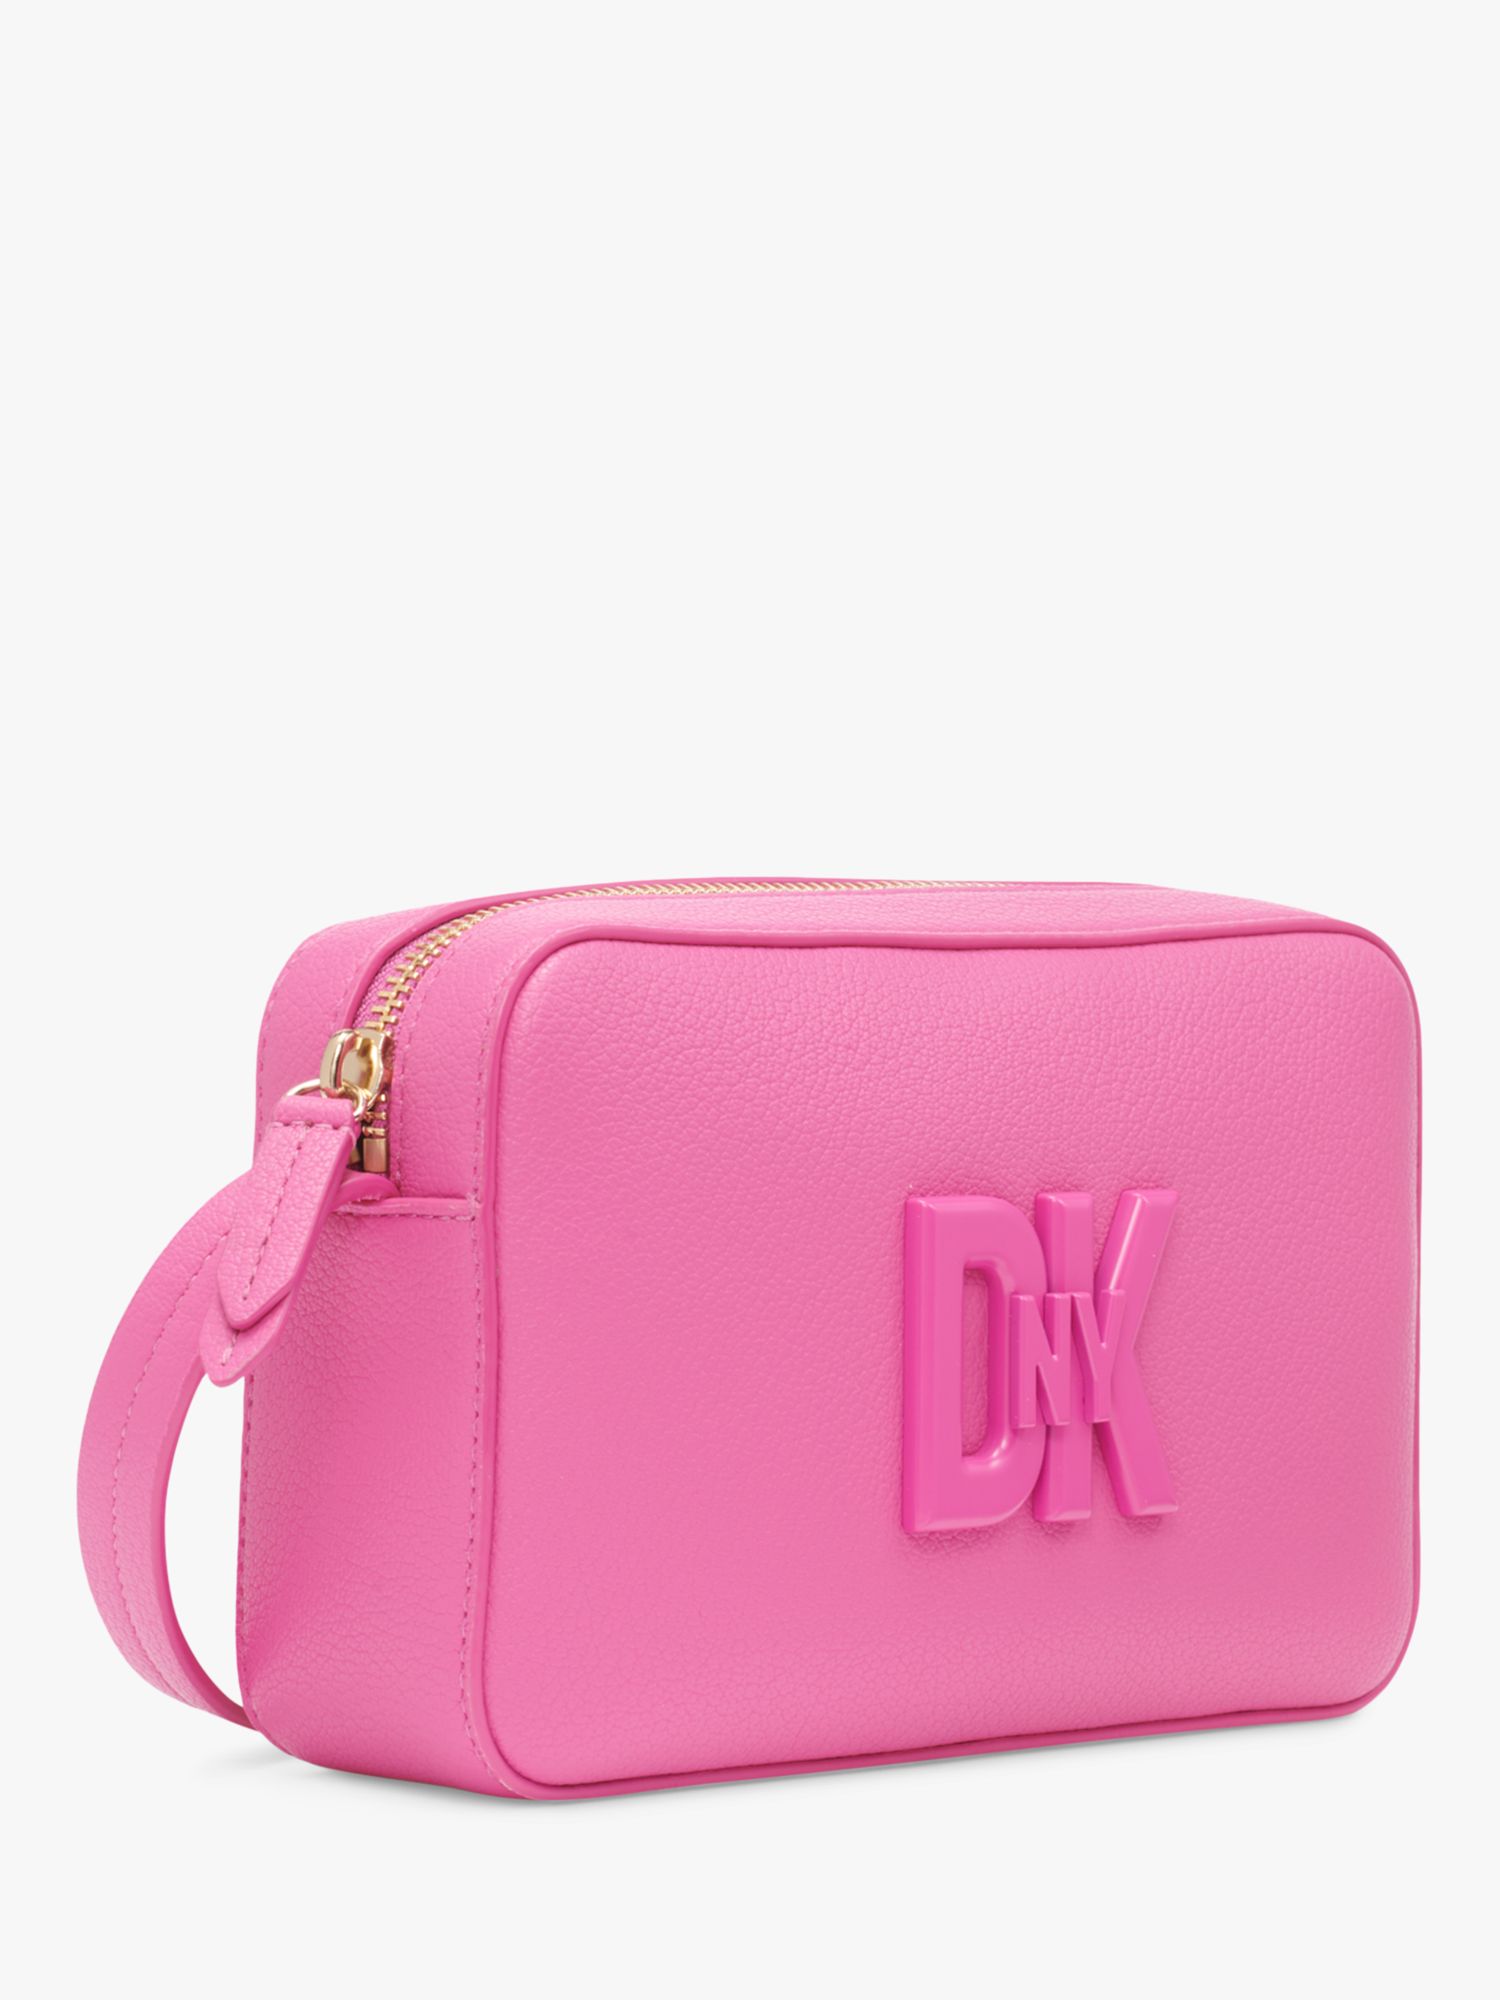 Buy DKNY 7th Avenue Leather Camera Bag Online at johnlewis.com